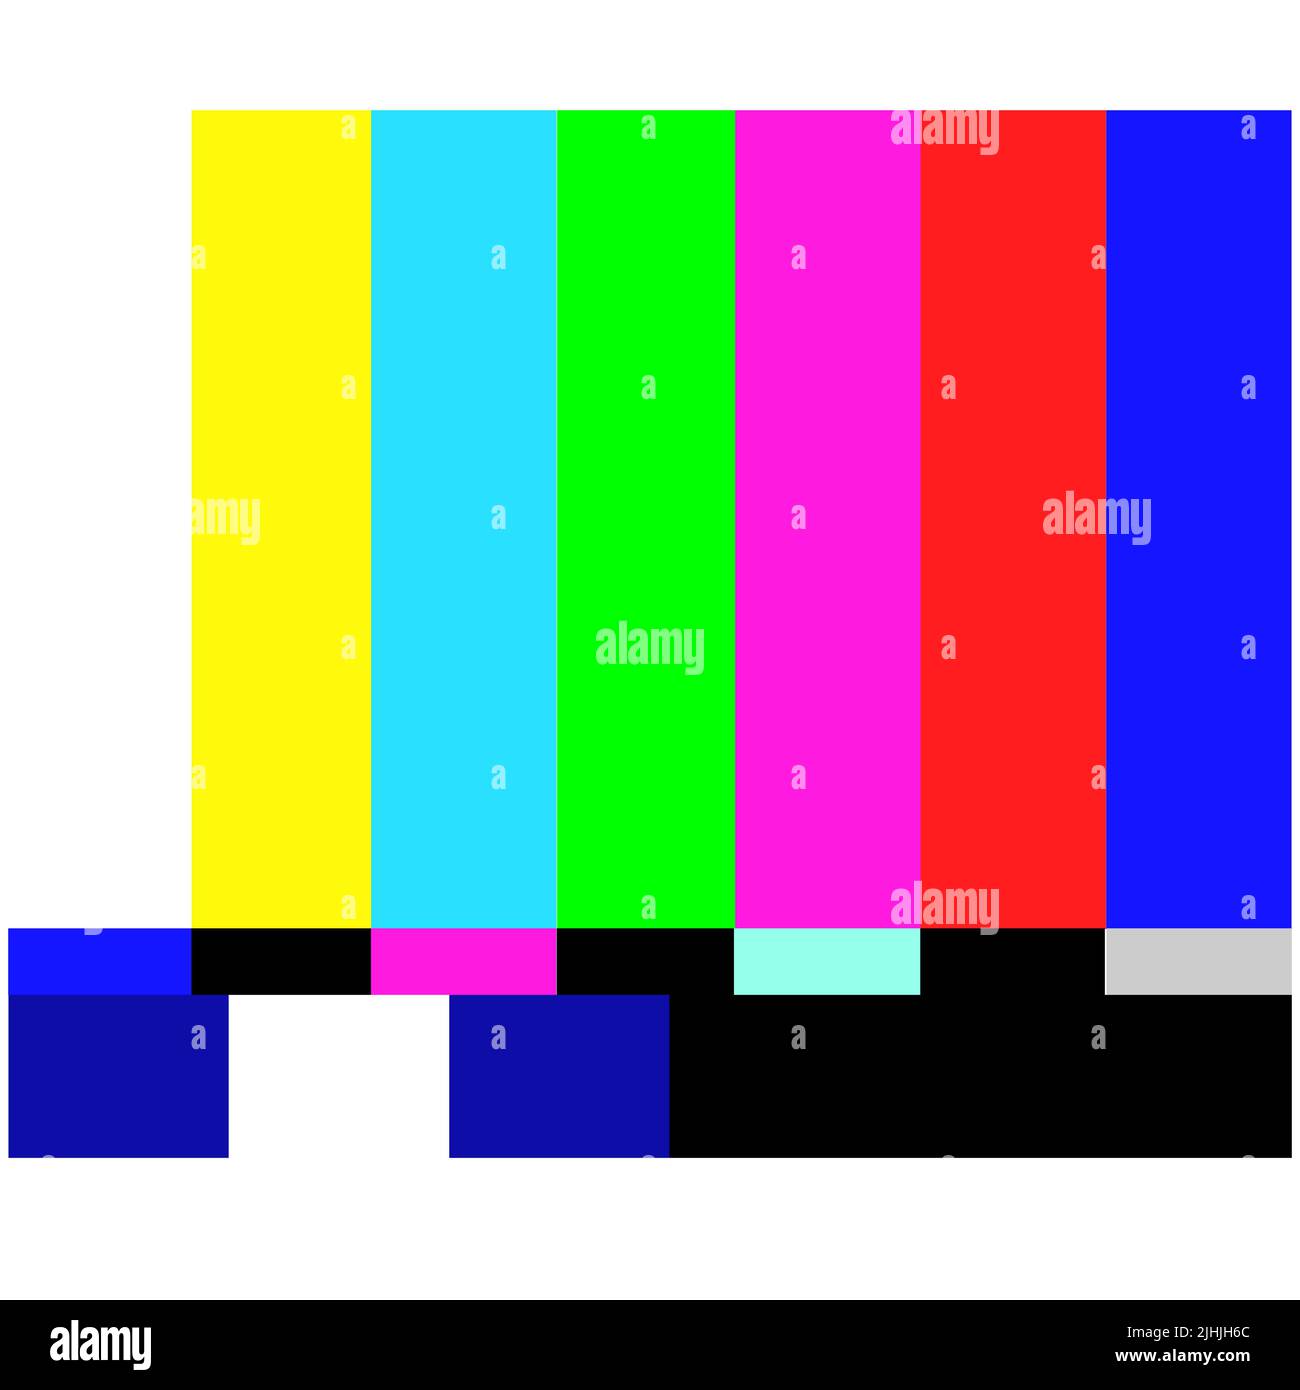 No signal poster. colorful error message displaying on TV screen. retro television test pattern. flat style. Stock Photo